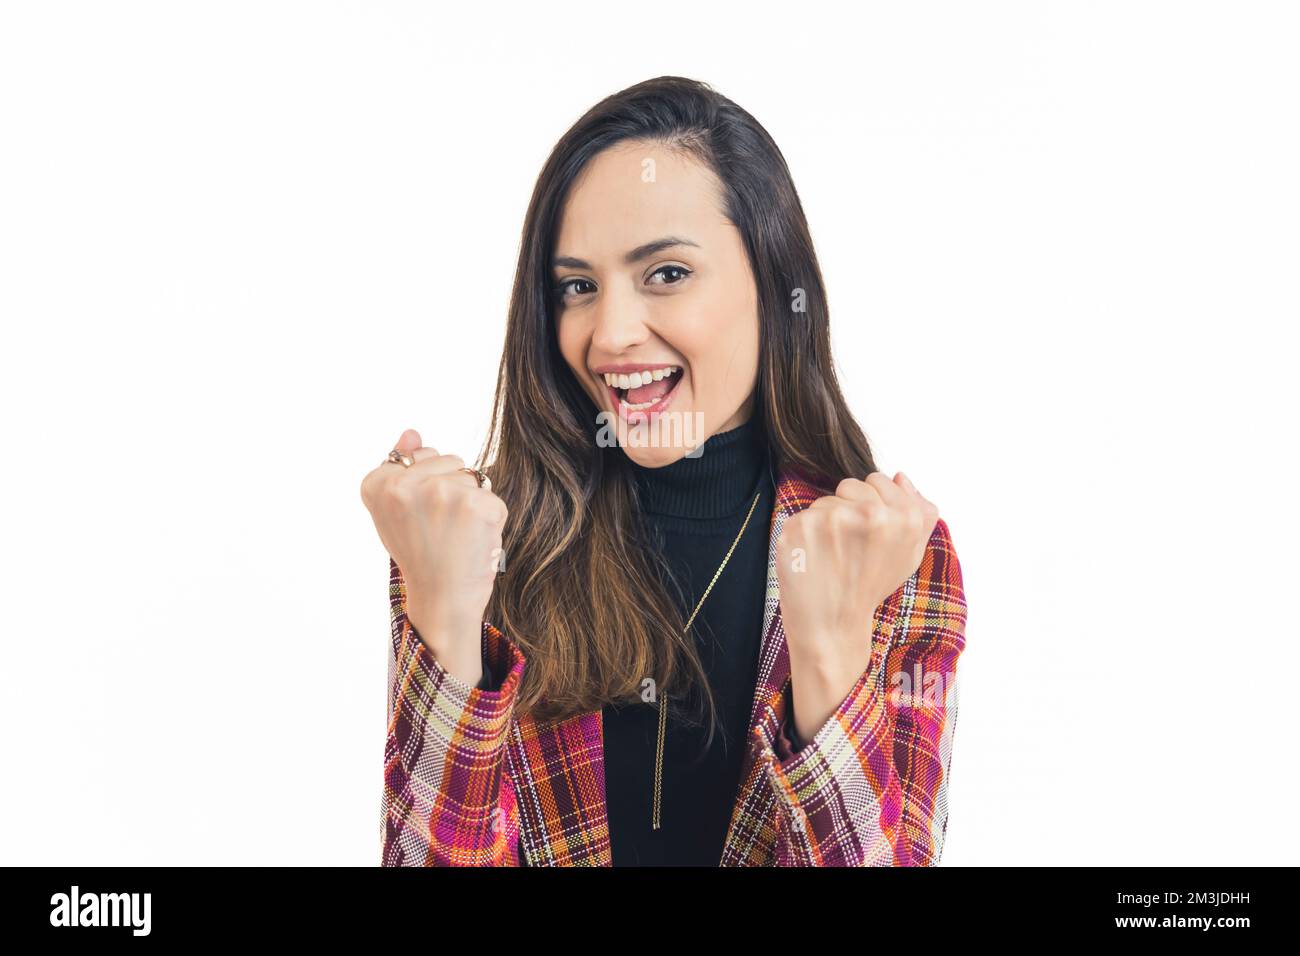 Portrait of latin american young woman wearing colorful blazer looking into camera smiling with both fists up gesturing success. White background copy space horizontal studio shot. High quality photo Stock Photo